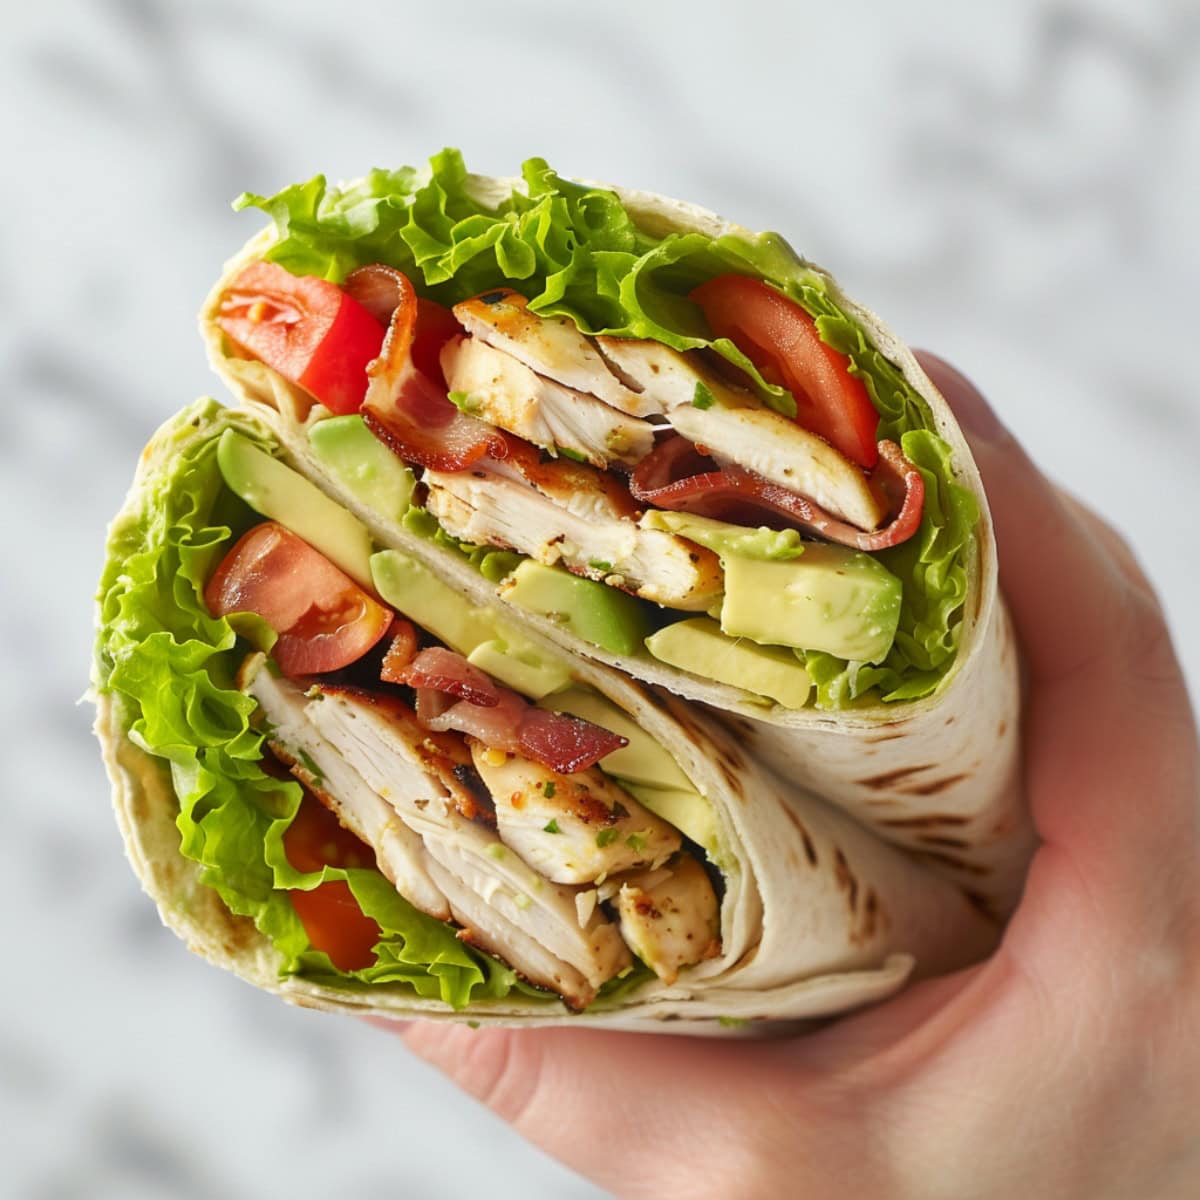 Hand holding chicken club wrap made with crisp lettuce, ripe avocado, juicy tomatoes, and crispy bacon in a soft tortilla wrap.